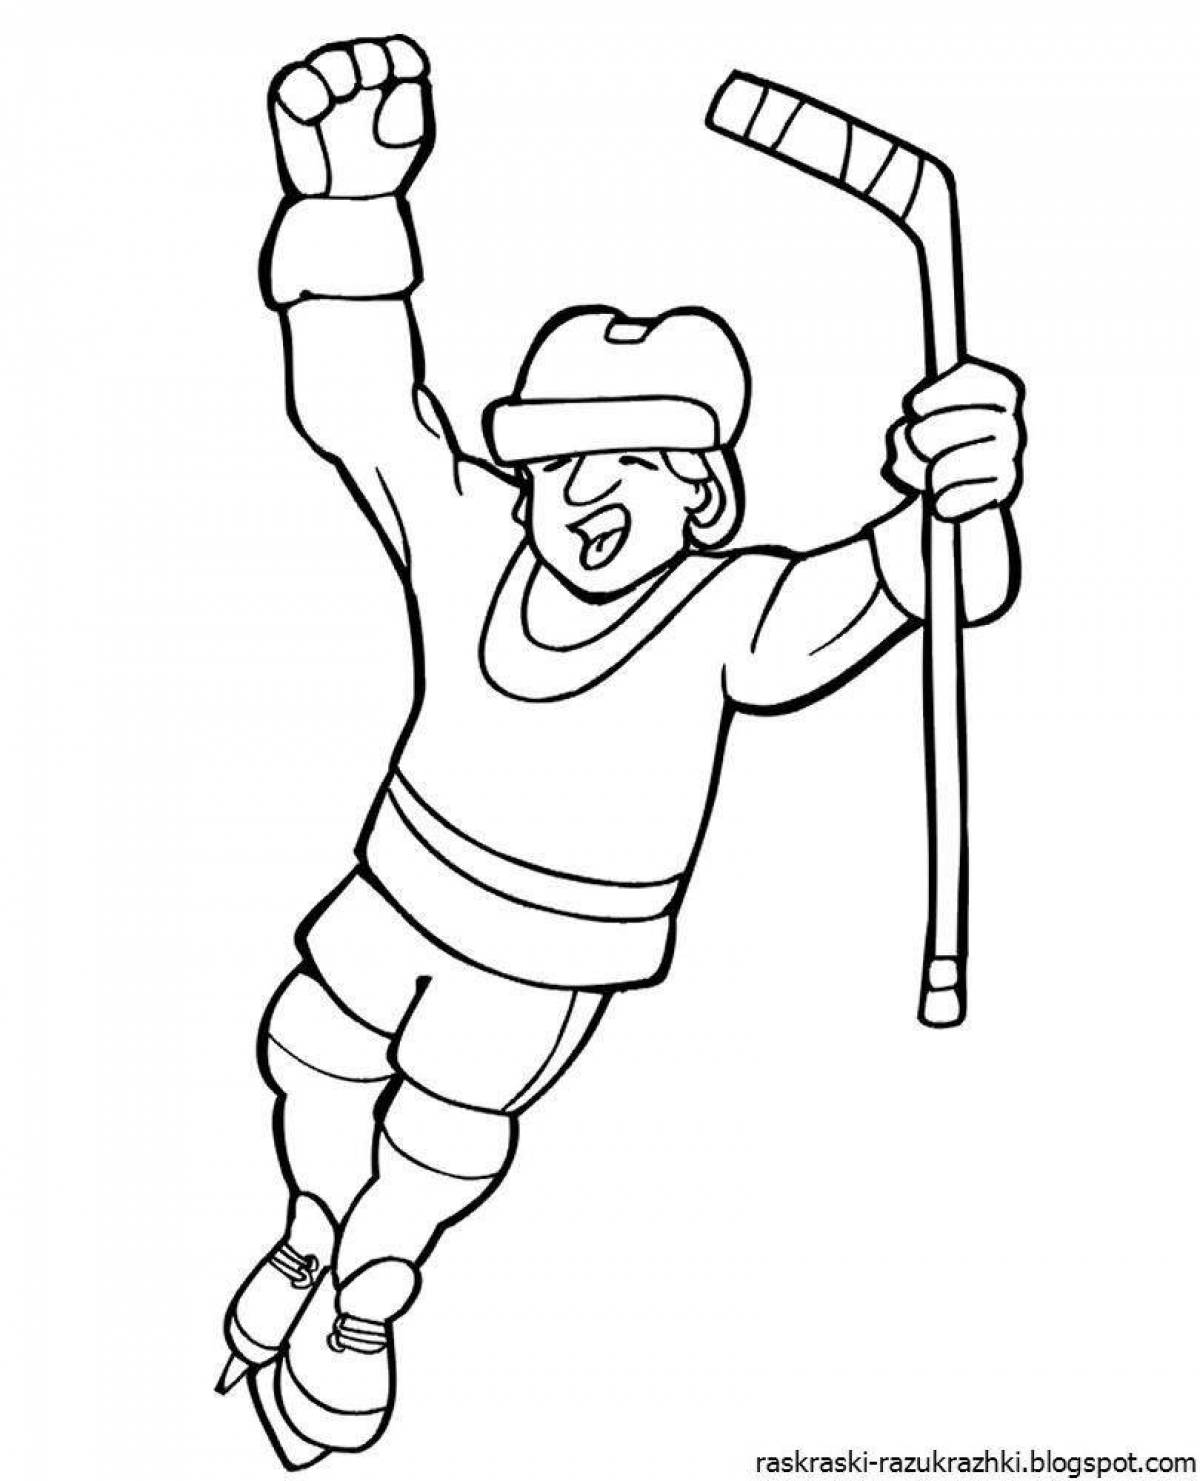 Fun hockey coloring book for kids